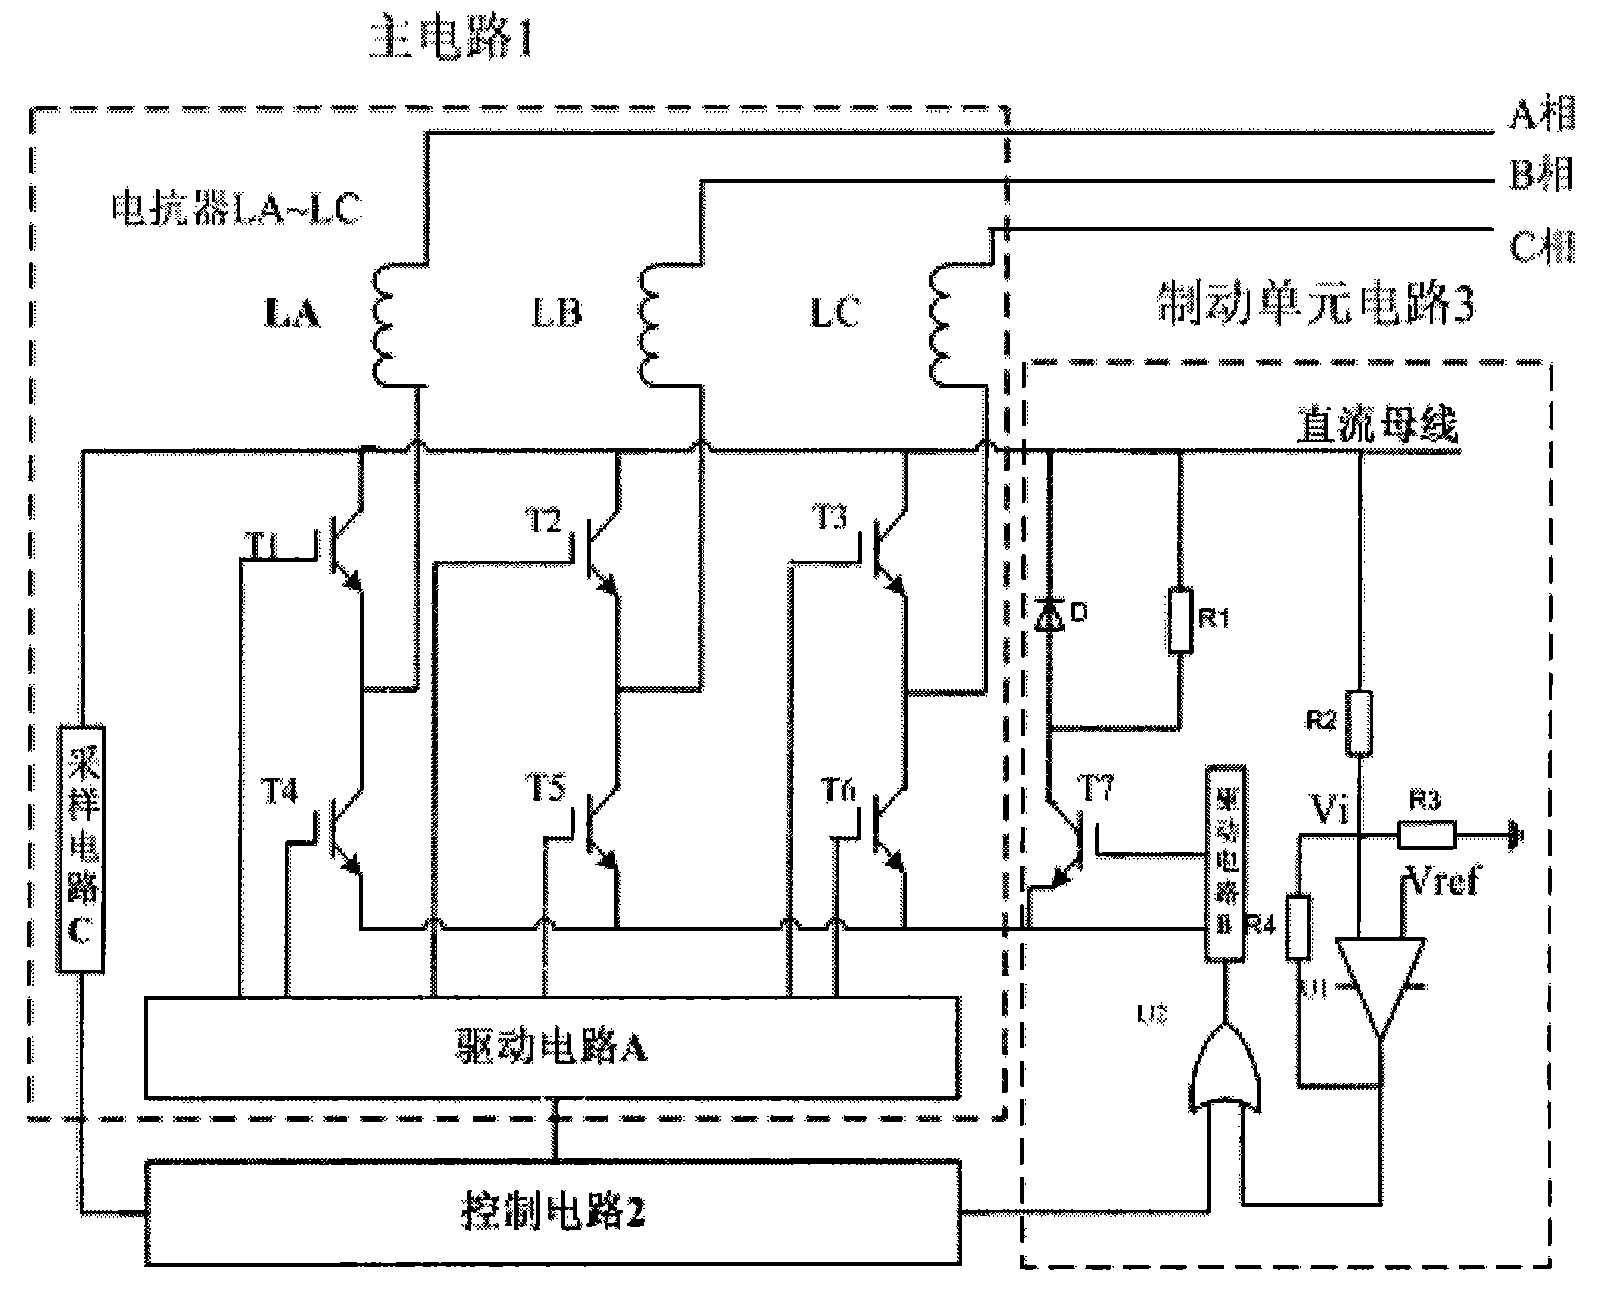 Control system for energy feedback-brake unit integrated machine of frequency conversion elevator